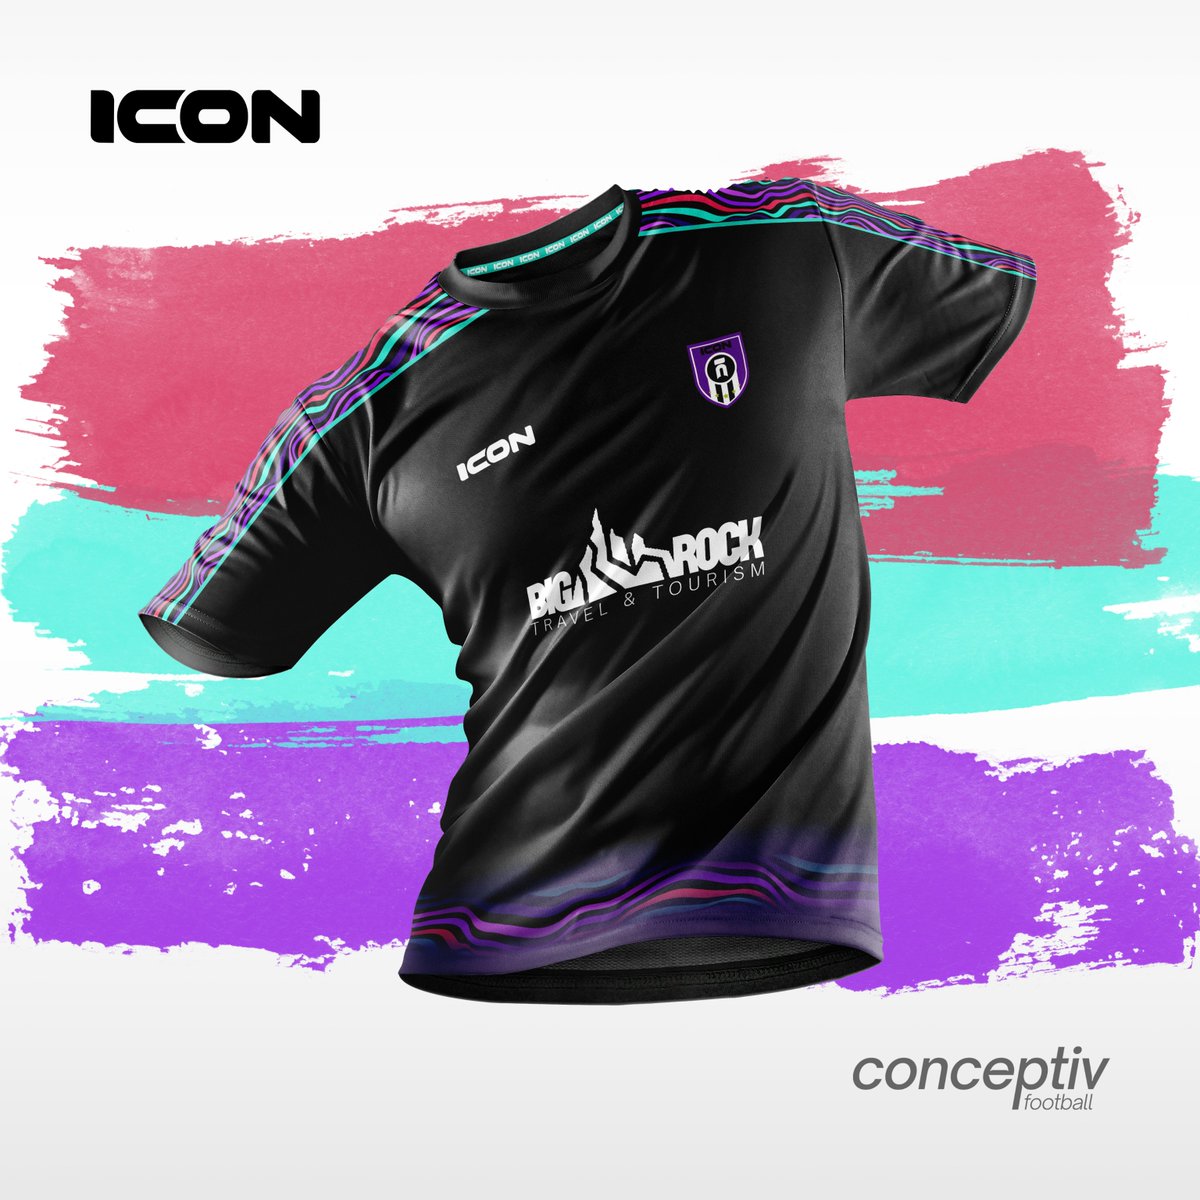 May this be your team's new style?👀 Check out the concepts designed by us at ICON for your inspiration🔥 Fancy a look? Contact our team now at sales@iconsports.co.uk #iconsports #iconsportsuk #teamwear #football #strengthinunity